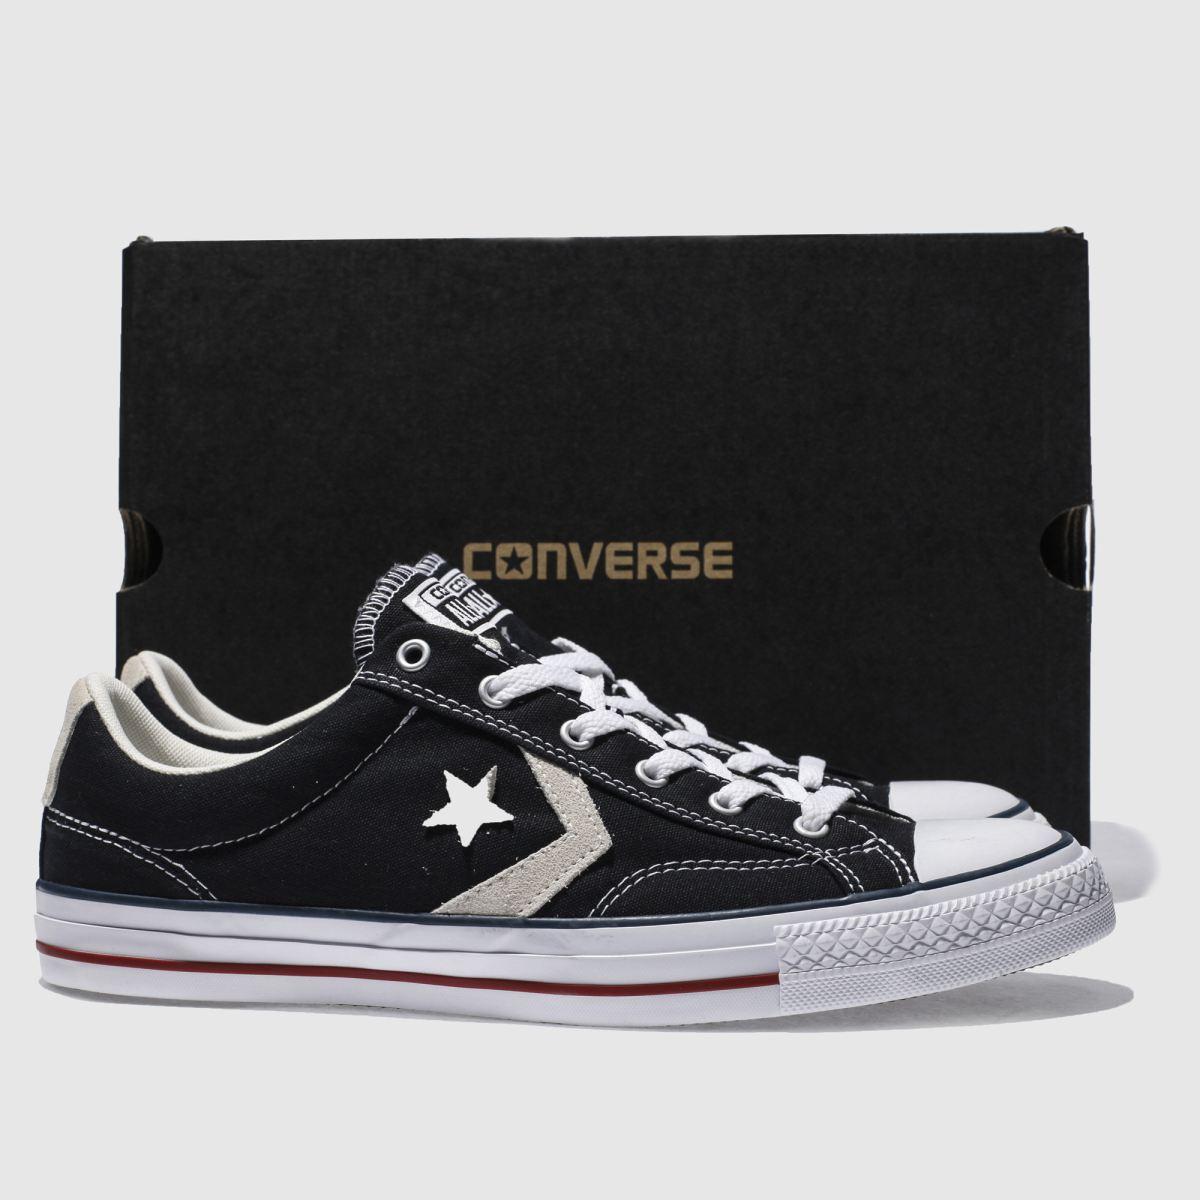 Converse Suede Star Player Remastered Trainers in Black for Men - Lyst